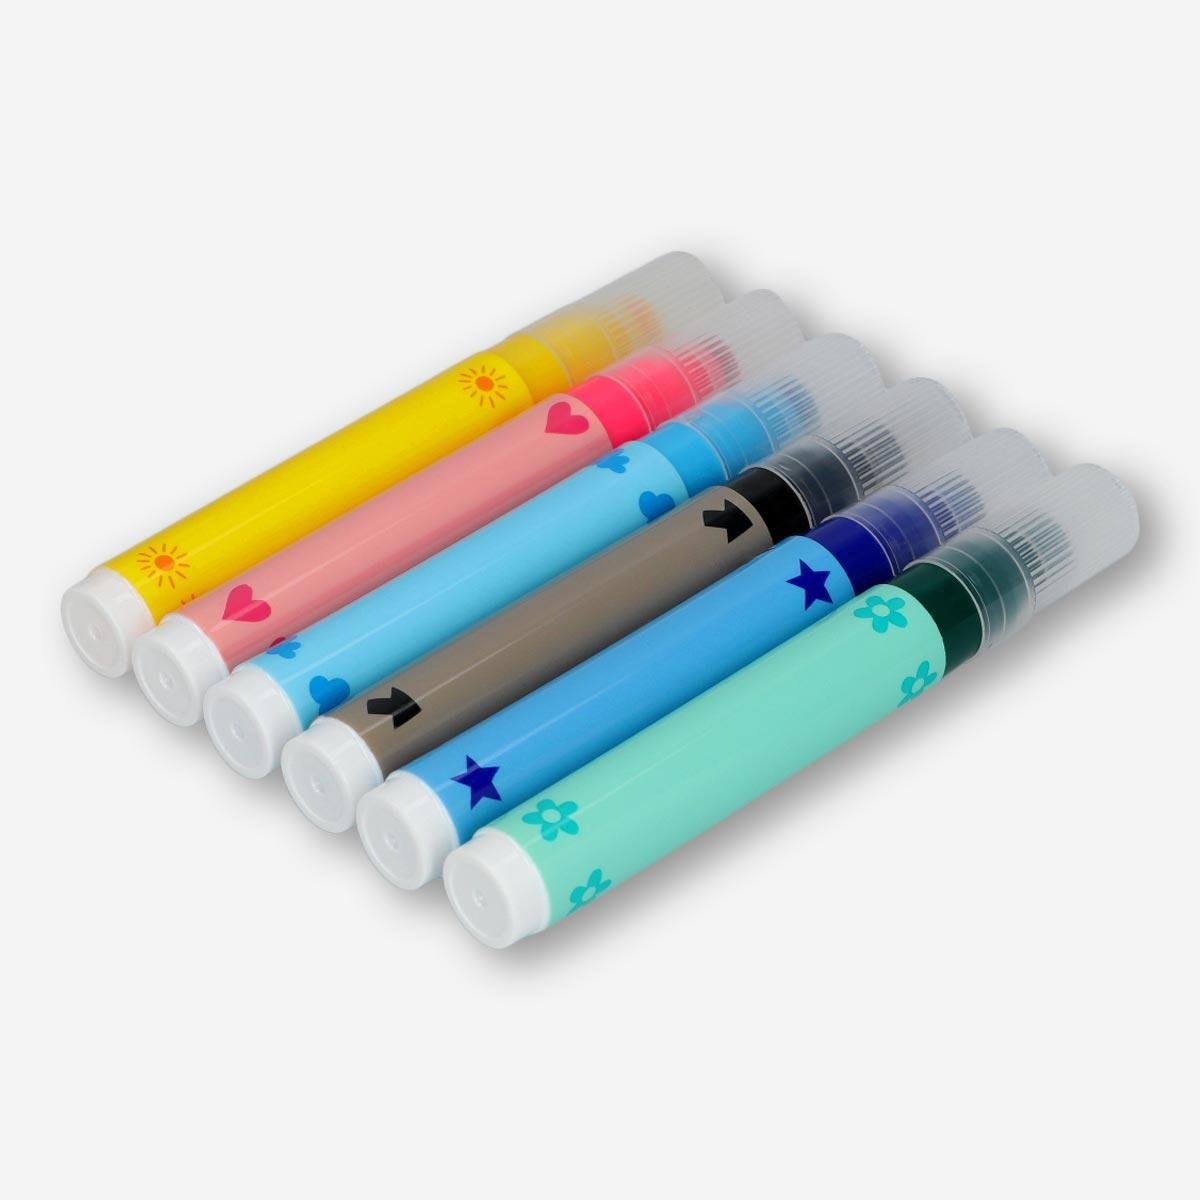 Multicolour markers with stamp